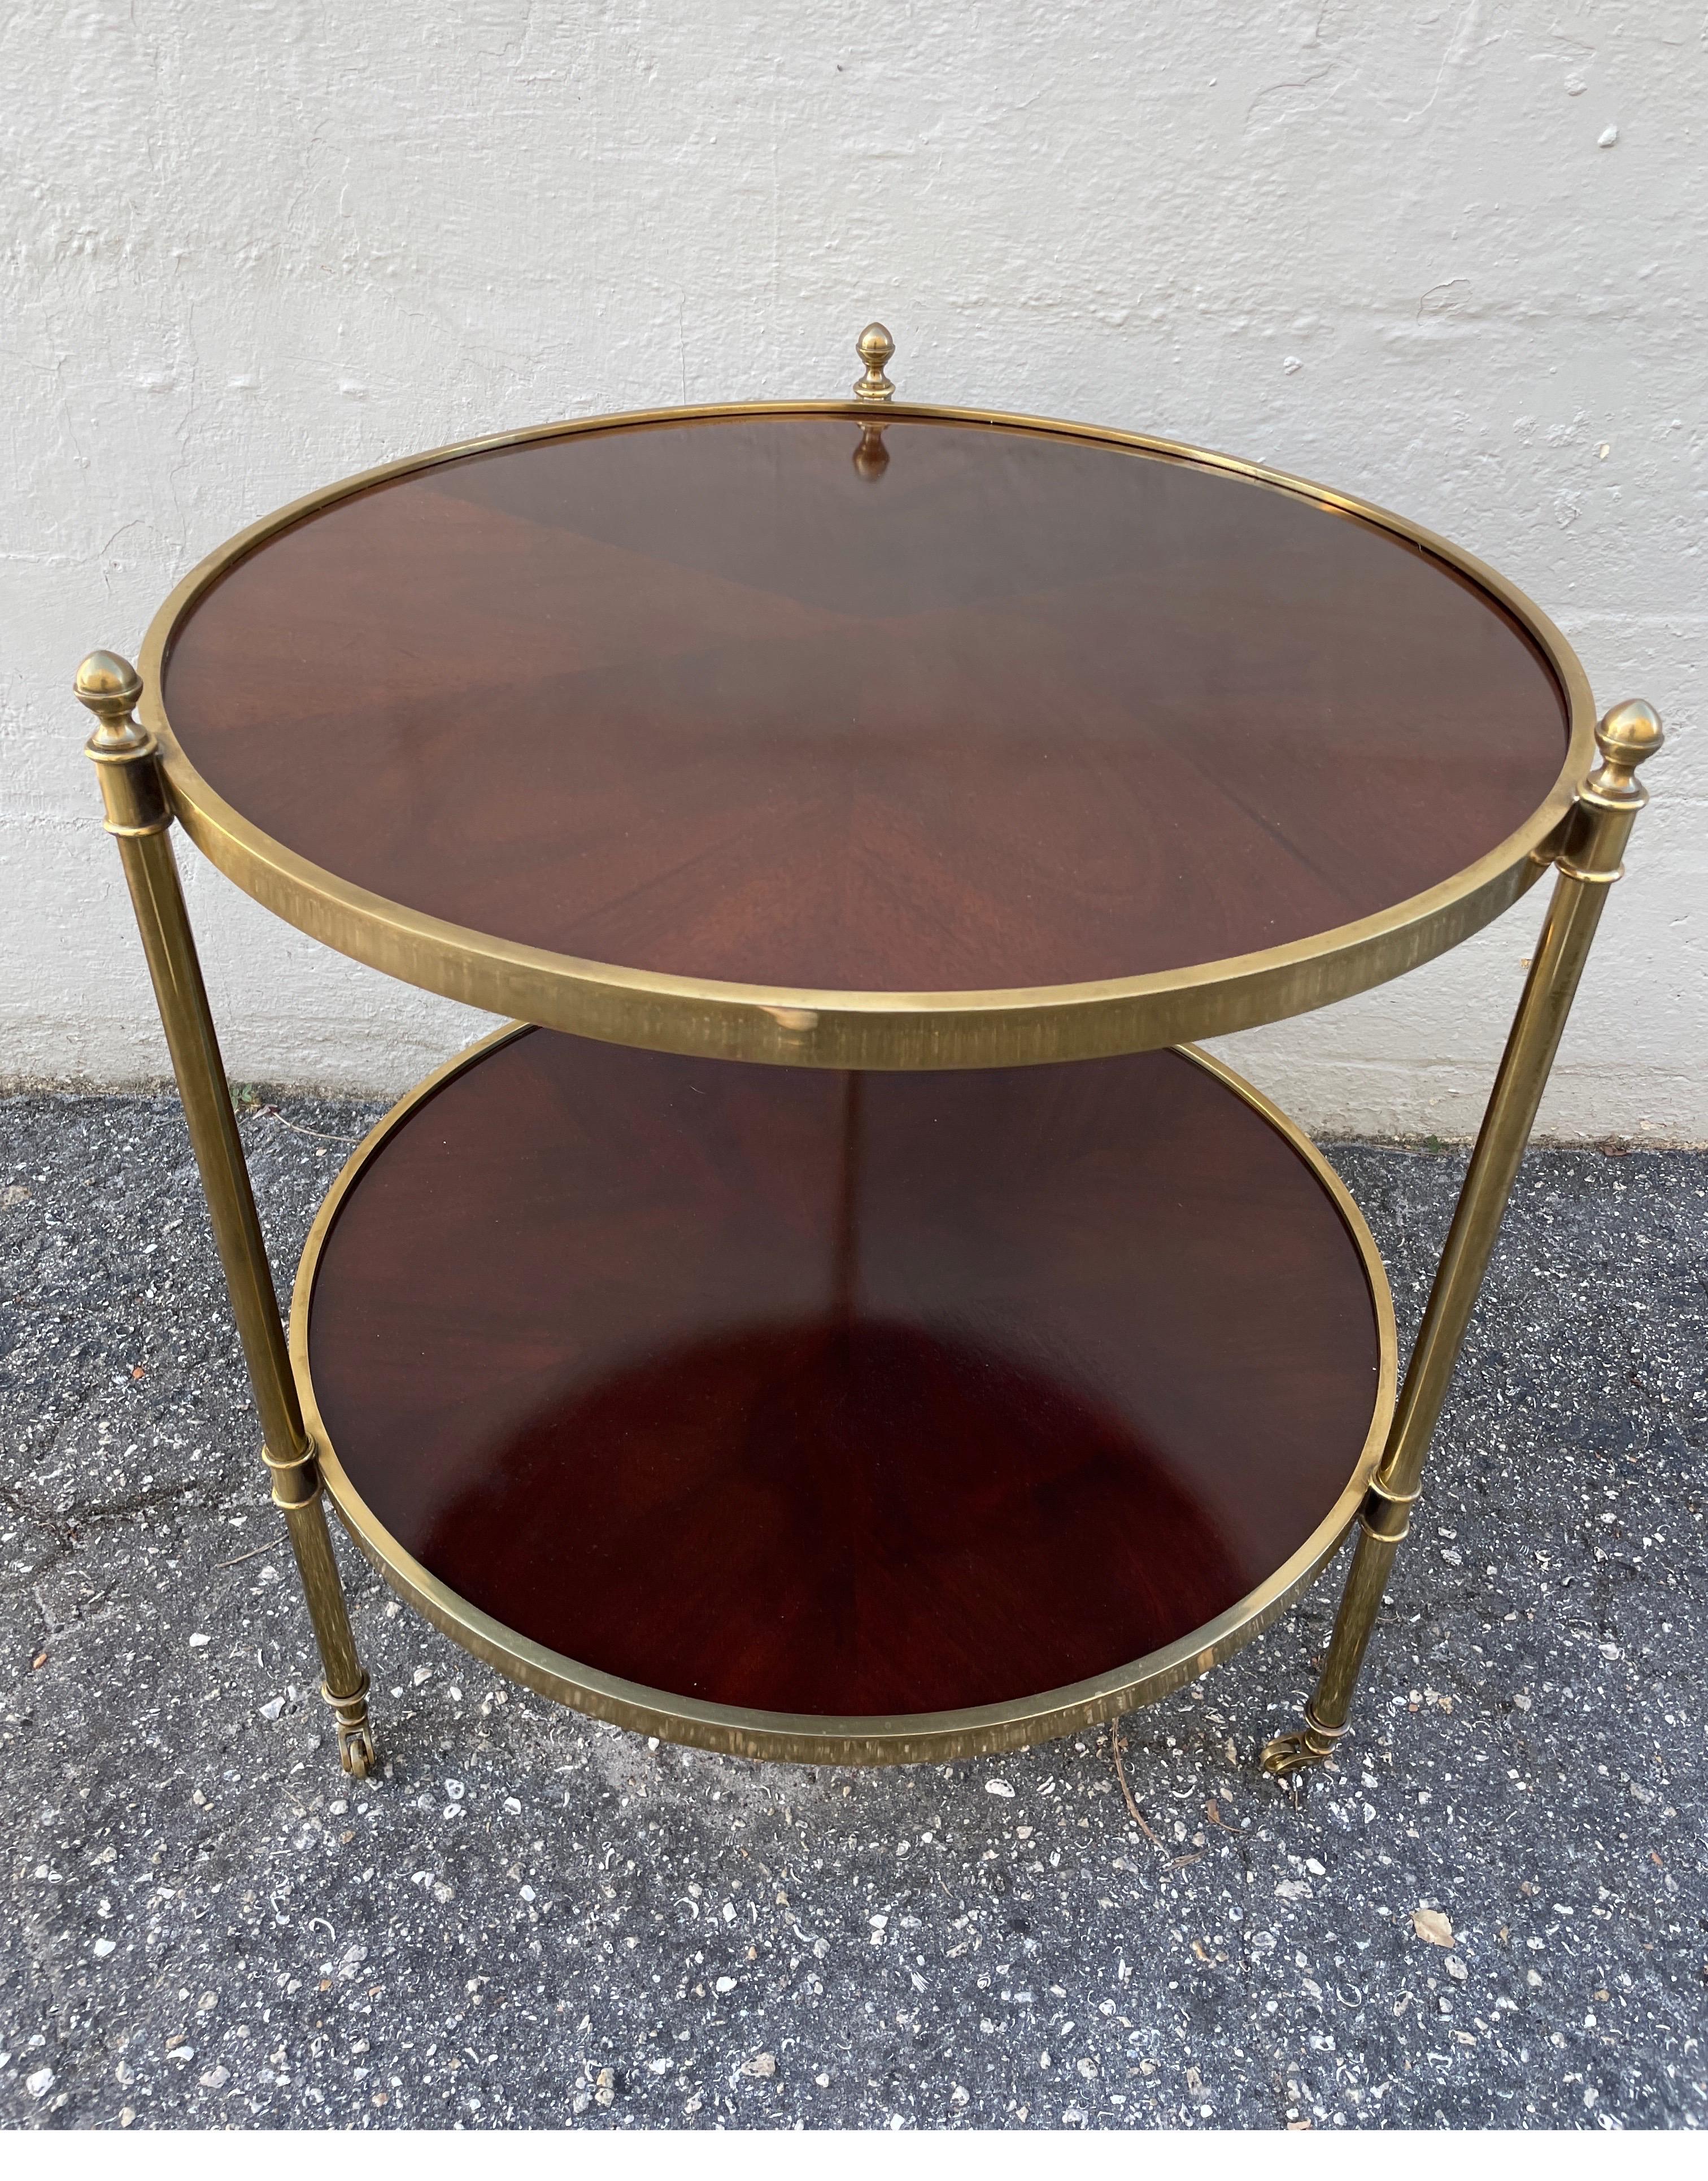 Vintage baker two tiered round table on casters. Would make a handsome bar cart.